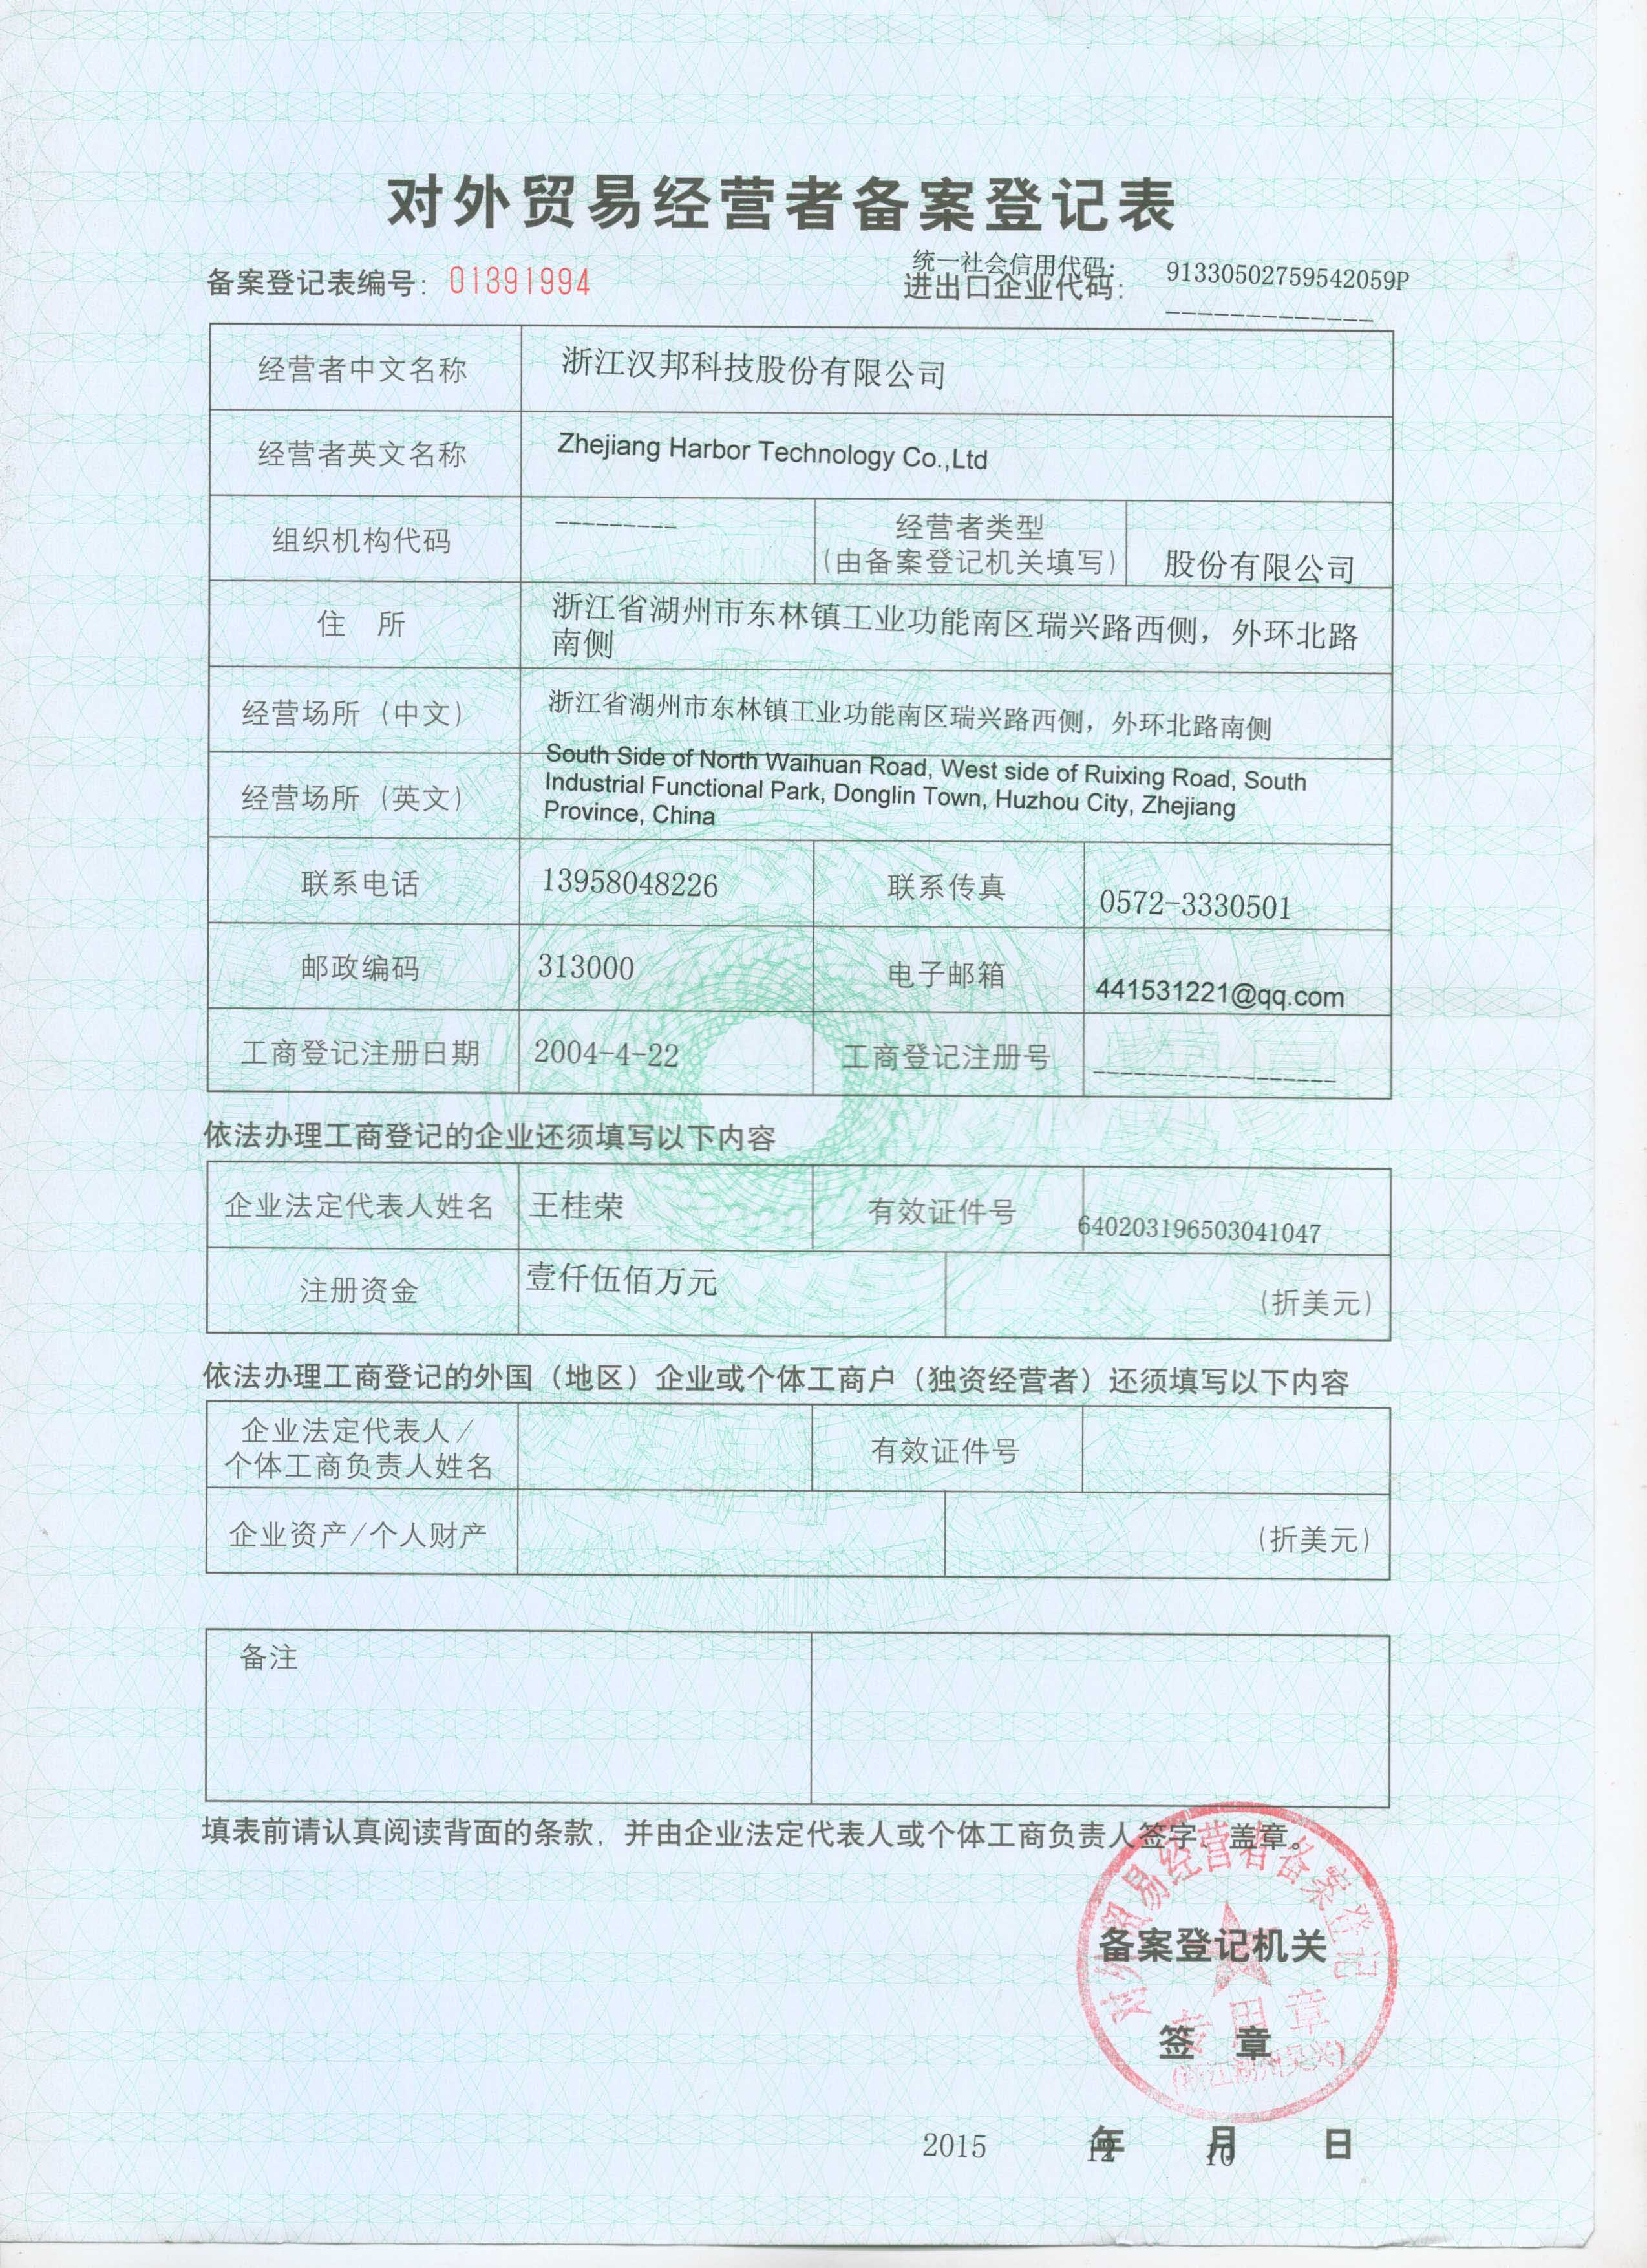 Foreign trade record certificate